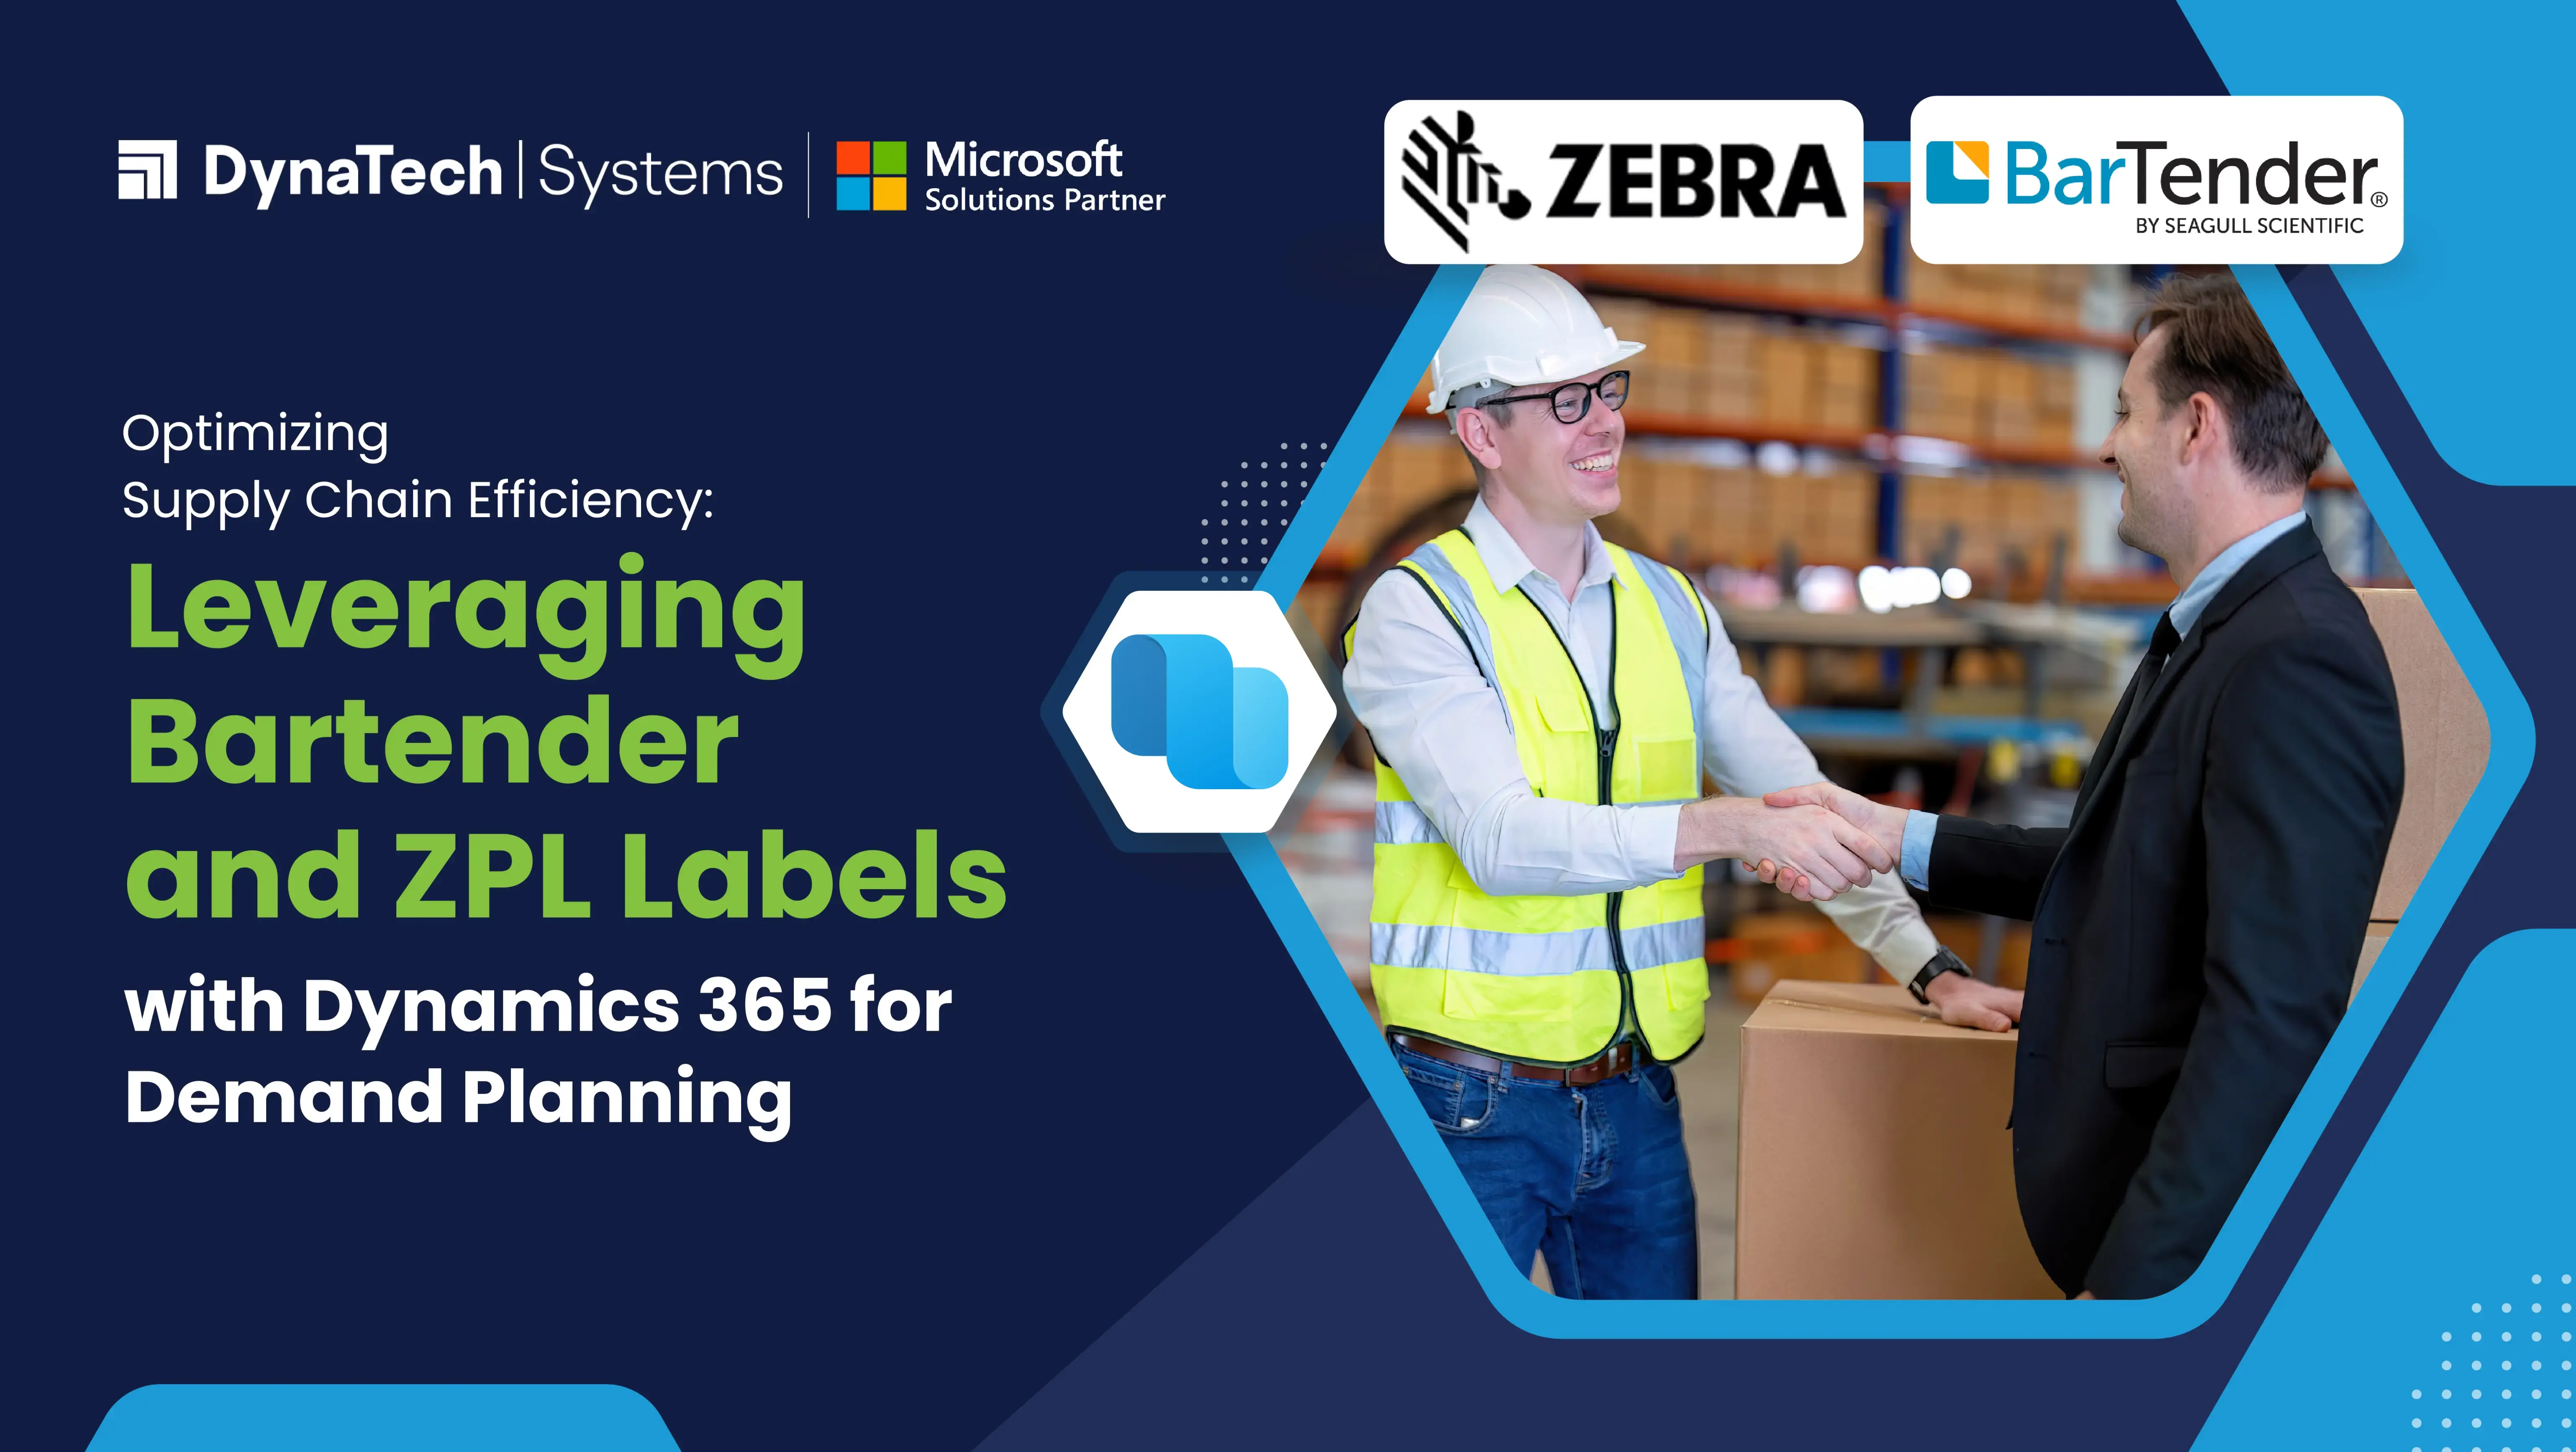 Optimizing Supply Chain Efficiency: Leveraging Bartender and ZPL Labels with Dynamics 365 for Demand Planning